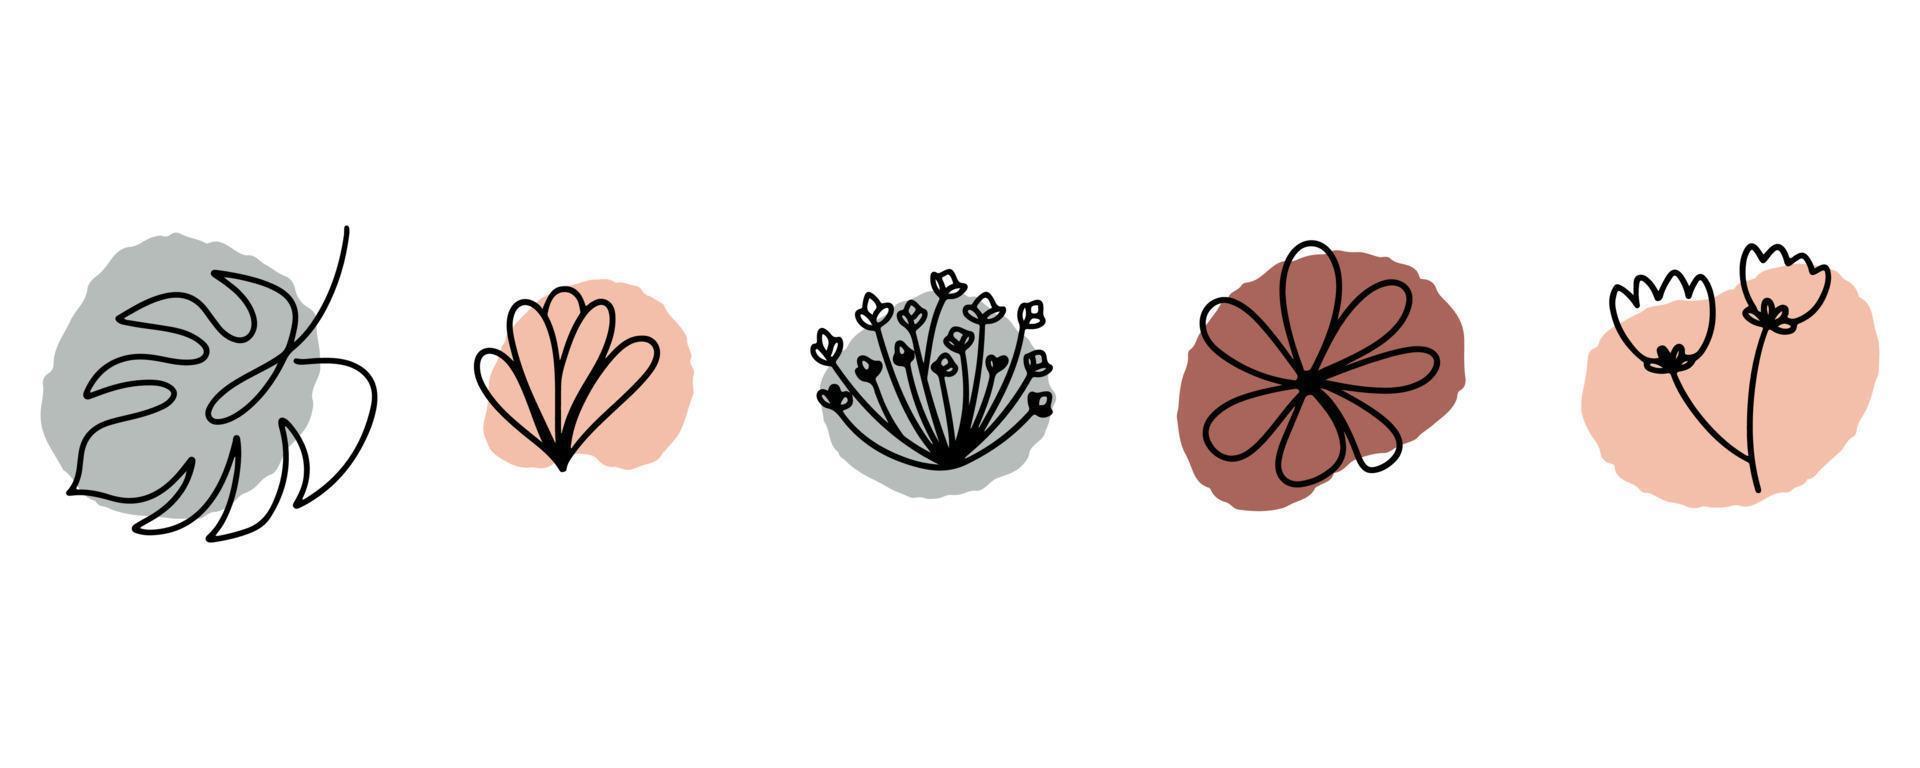 Flower doodle line art with abstract shapes and floral elements.Vector and illustration vector